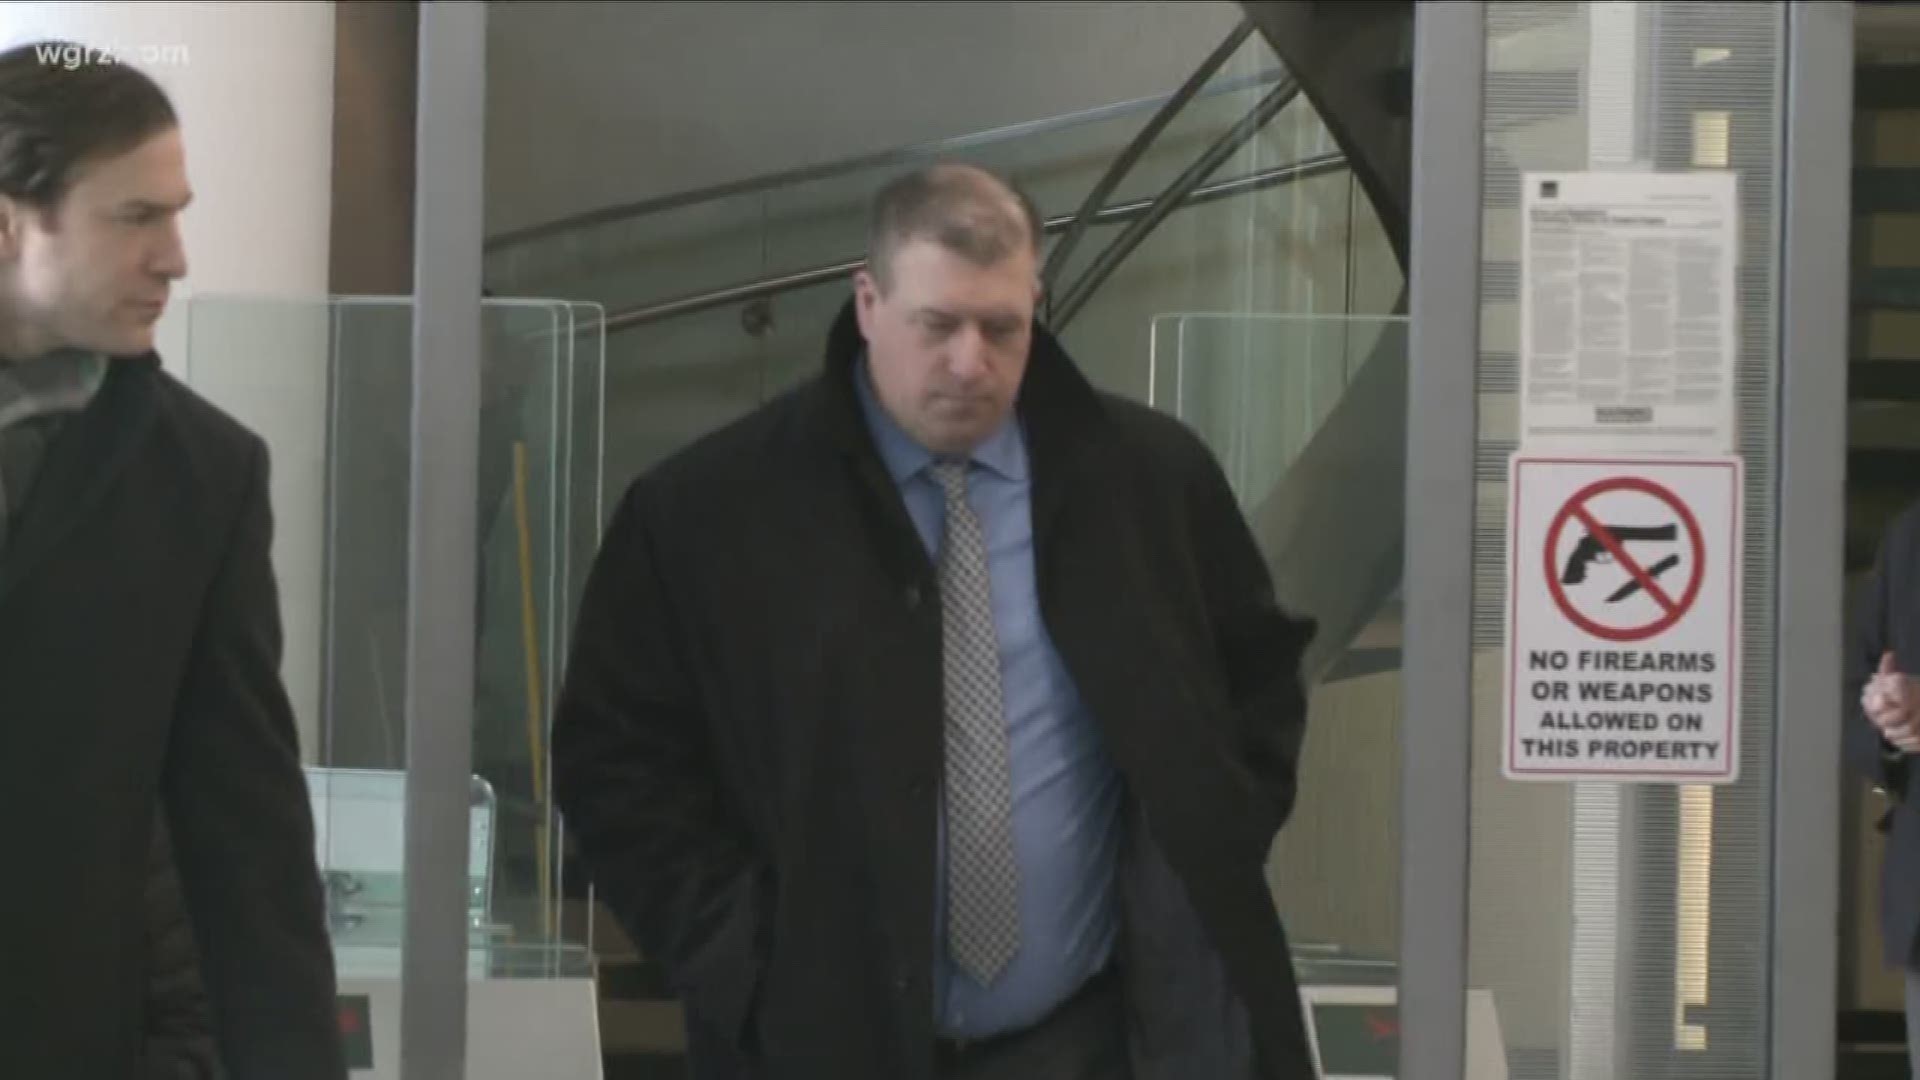 Krug acquitted of 3 out of 4 charges, will face retrial on 4th charge